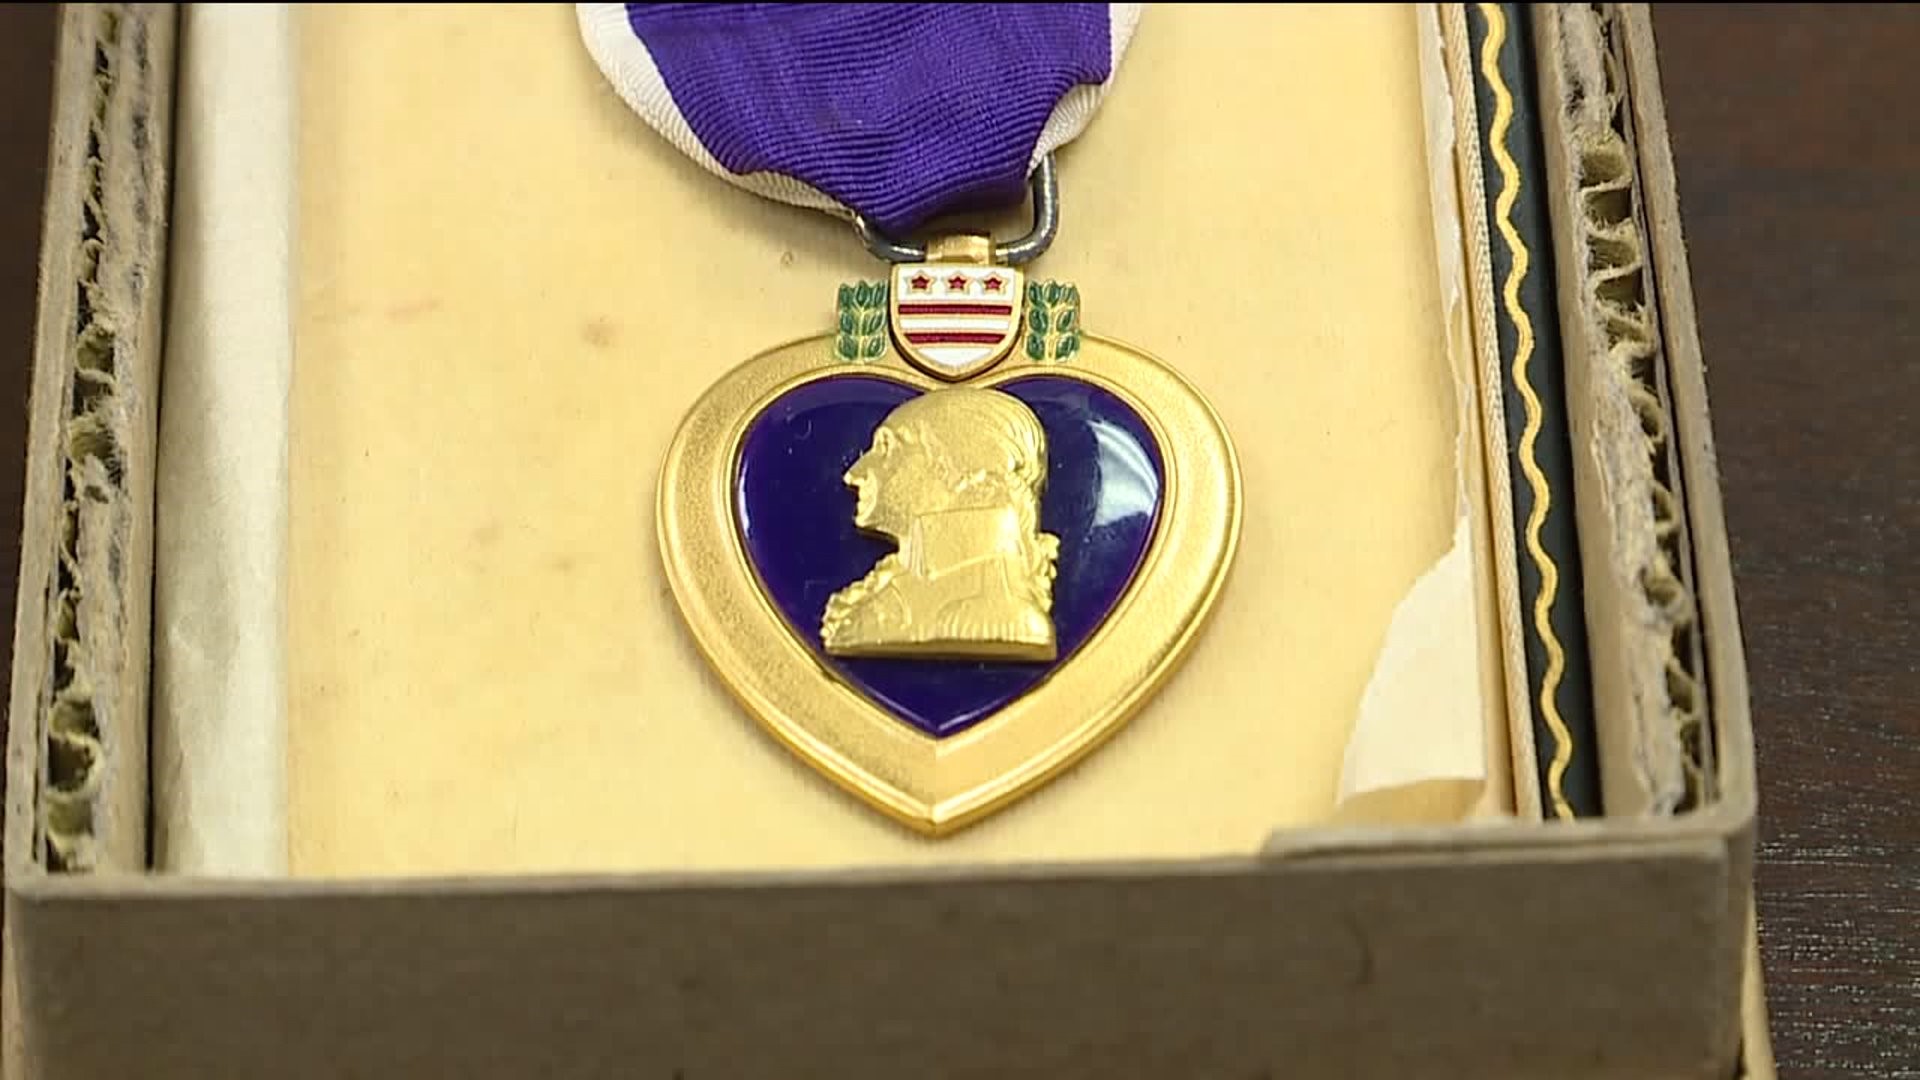 Veterans Affairs Officials Looking for WWII Veteran's Family After His Purple Heart Is Found